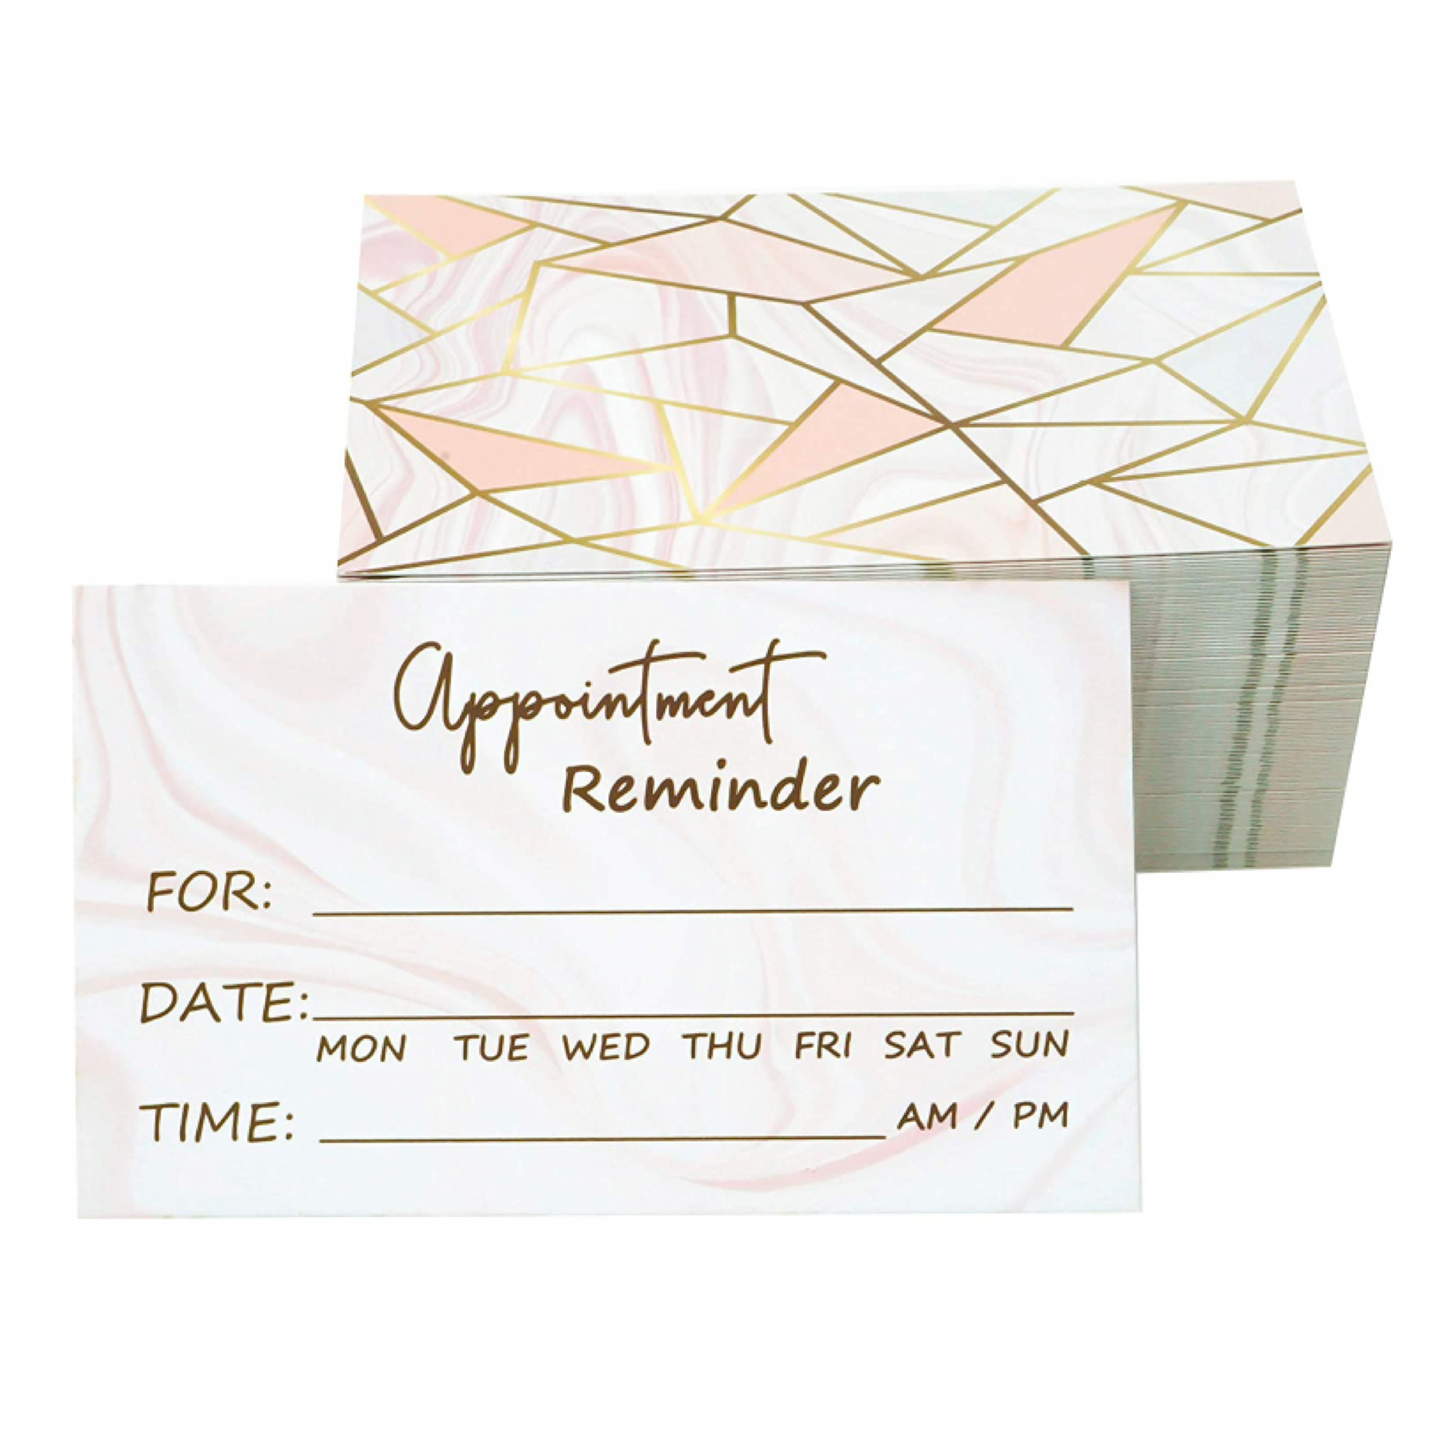 Appointment Reminder Cards | Price for 1 card